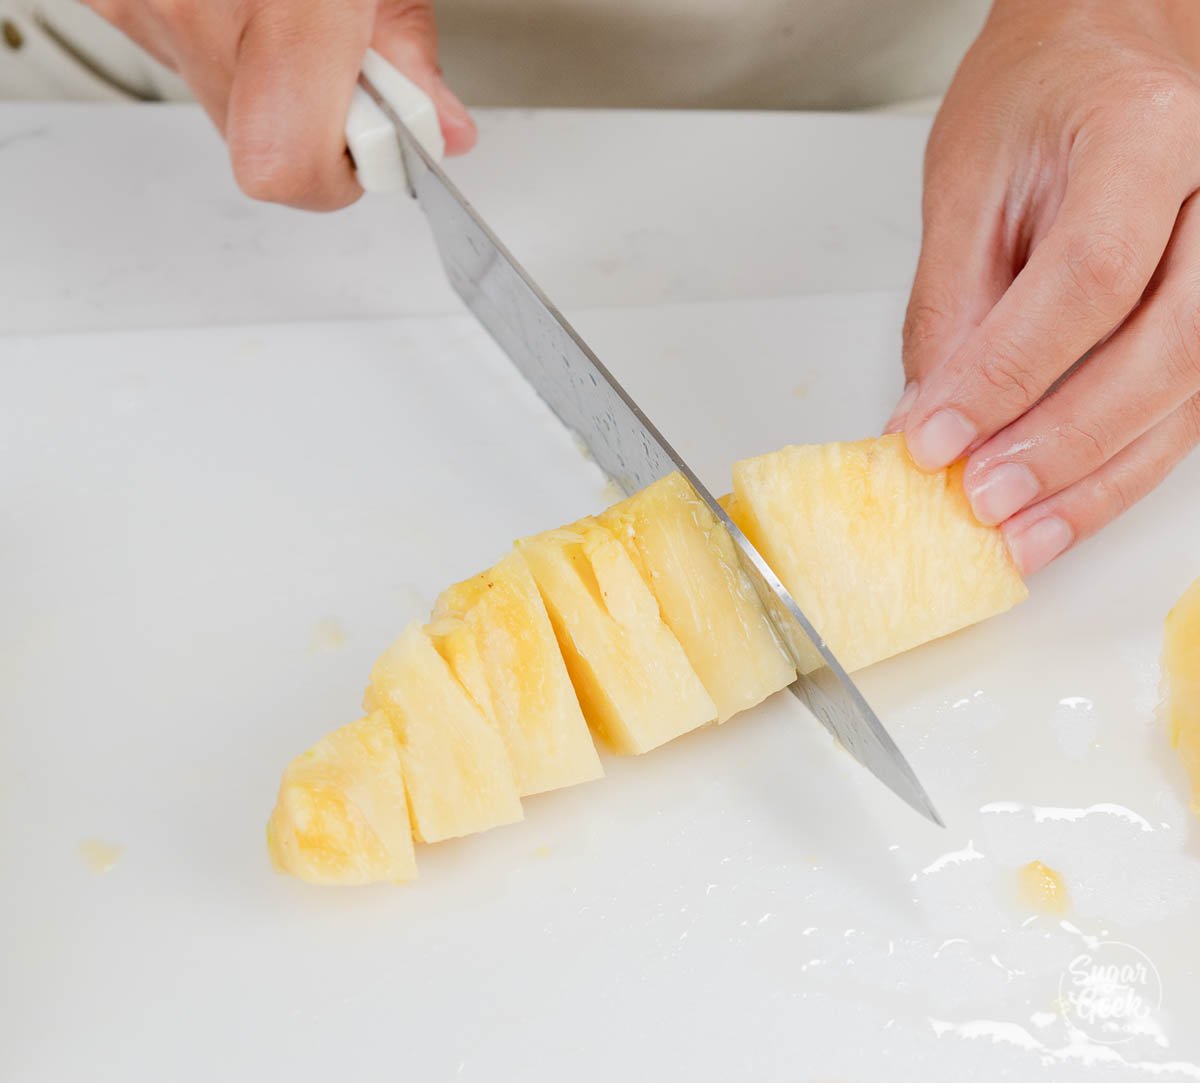 hand using knife to dice pineapple.